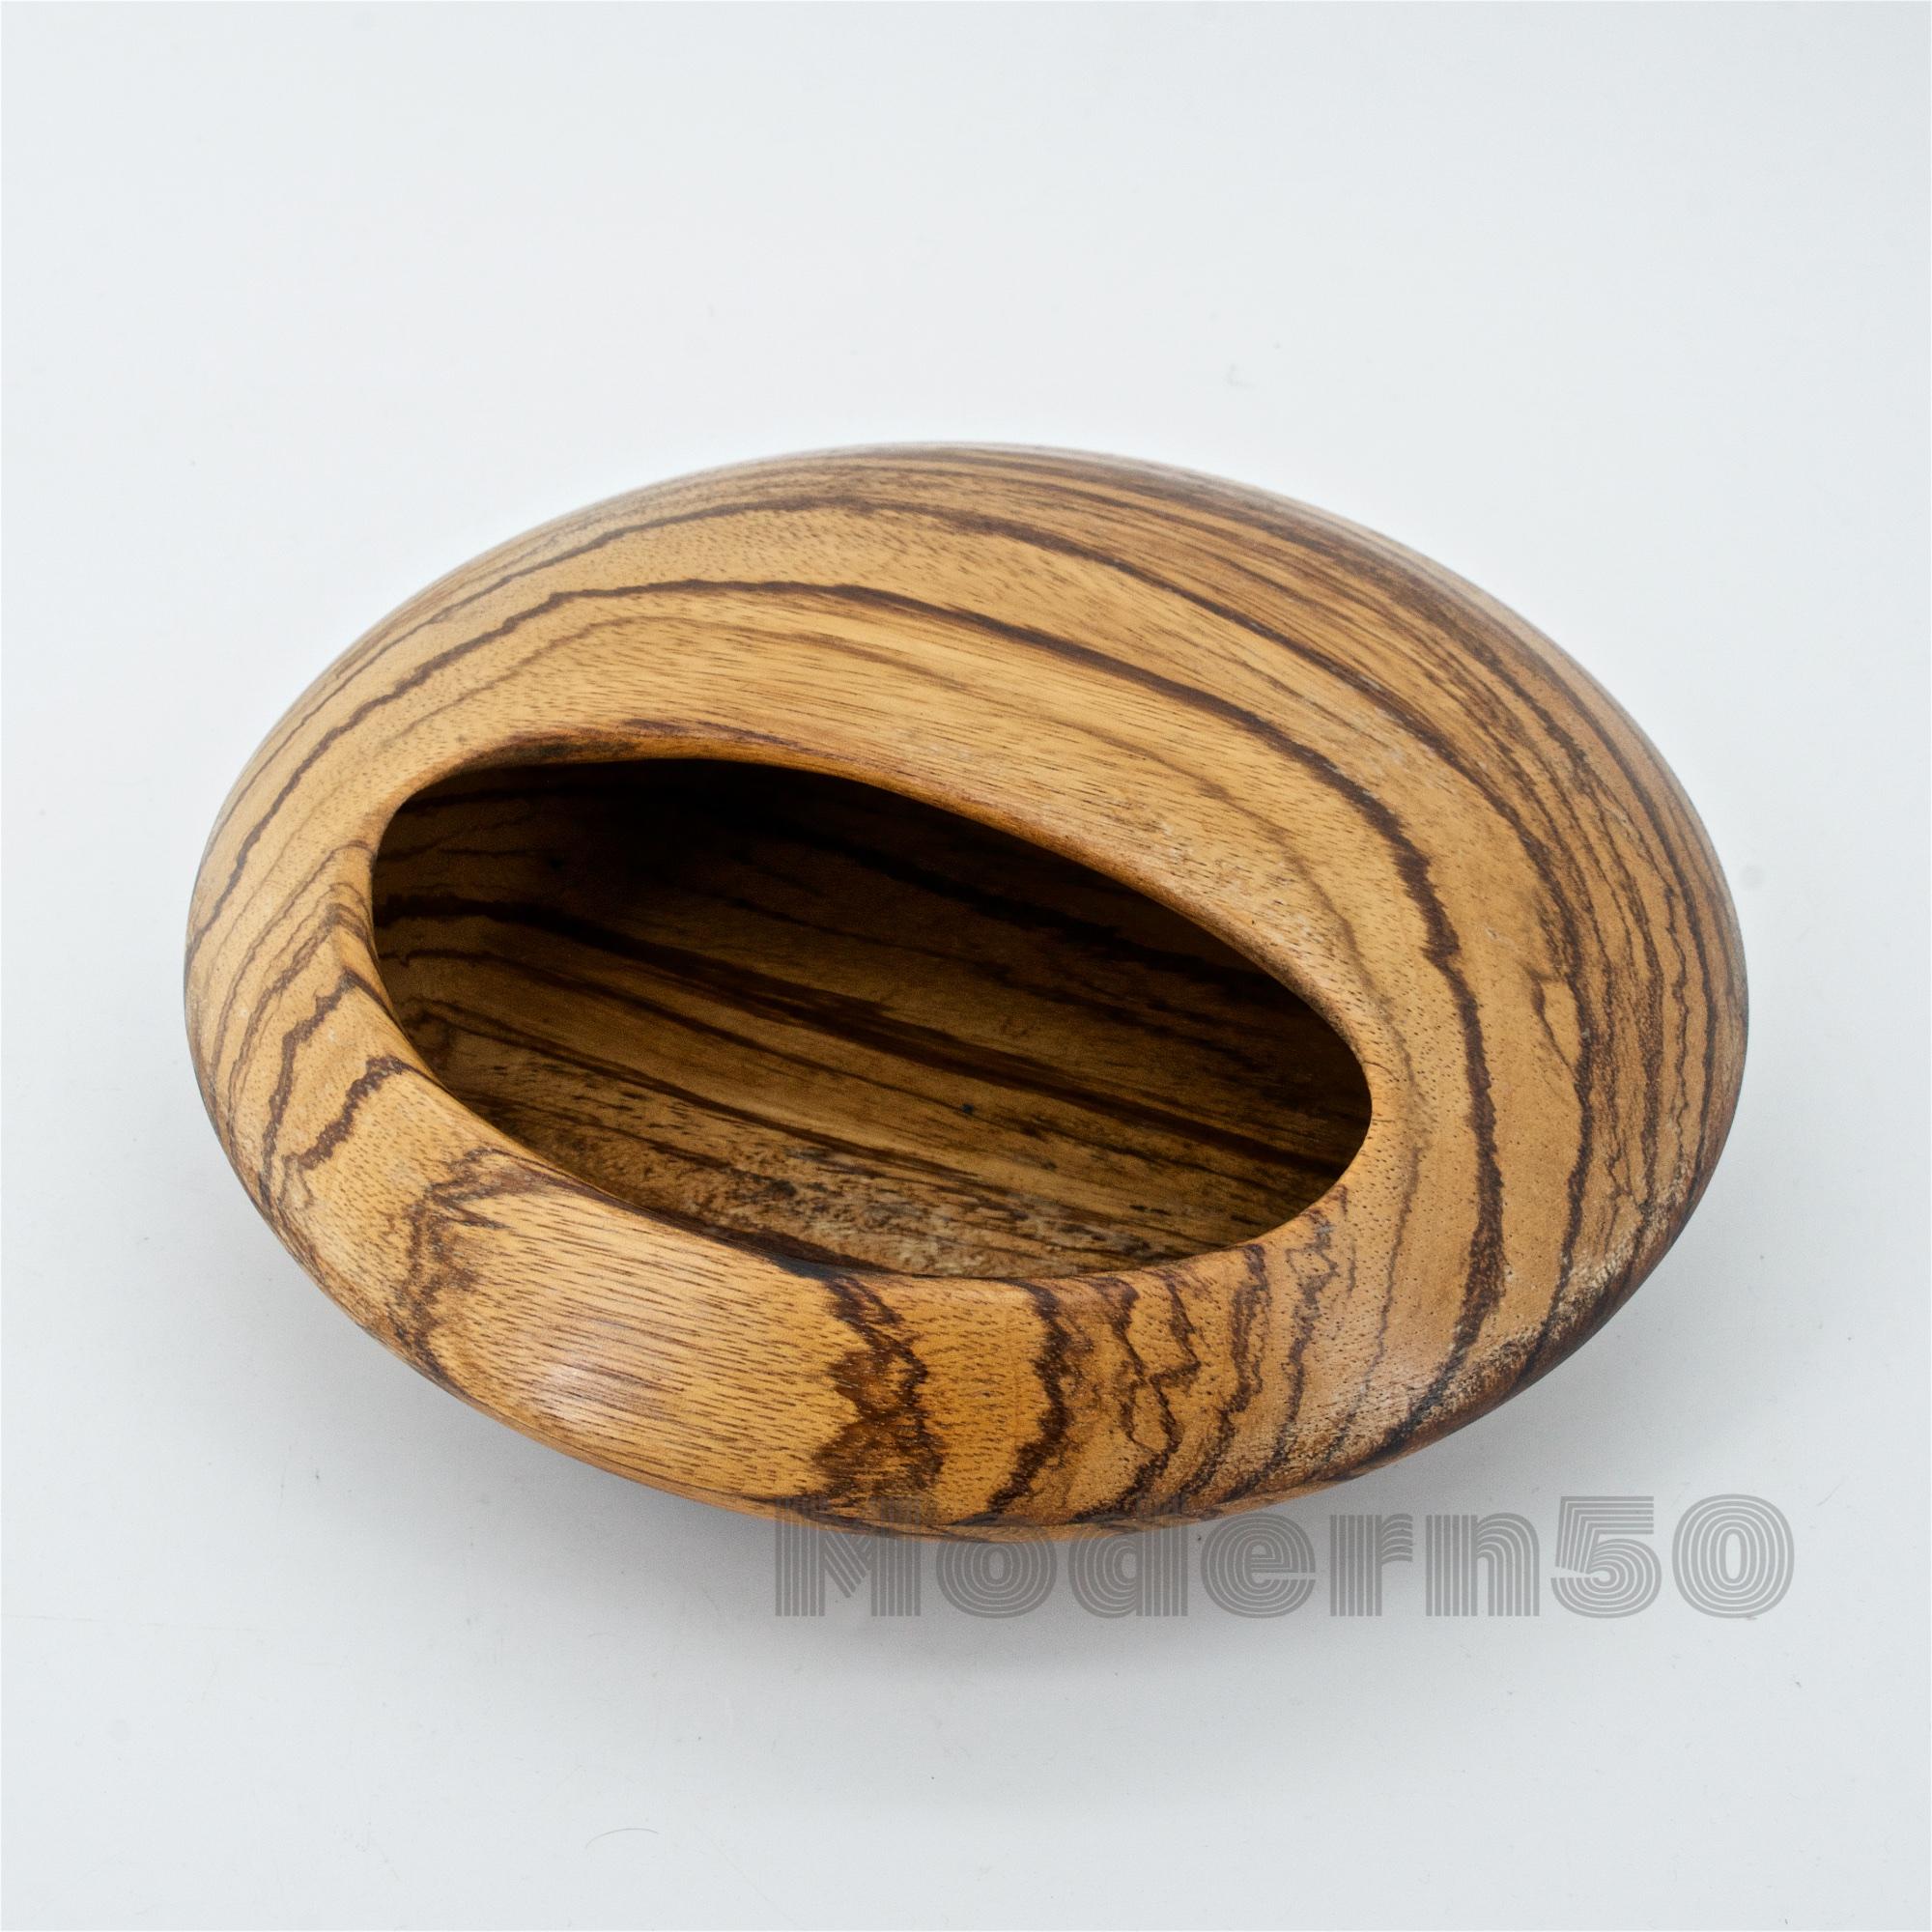 Turned shallow orb in zebra wood. Made in Sweden. Attributed to Sigvard Nilsson. Marked SOWE.